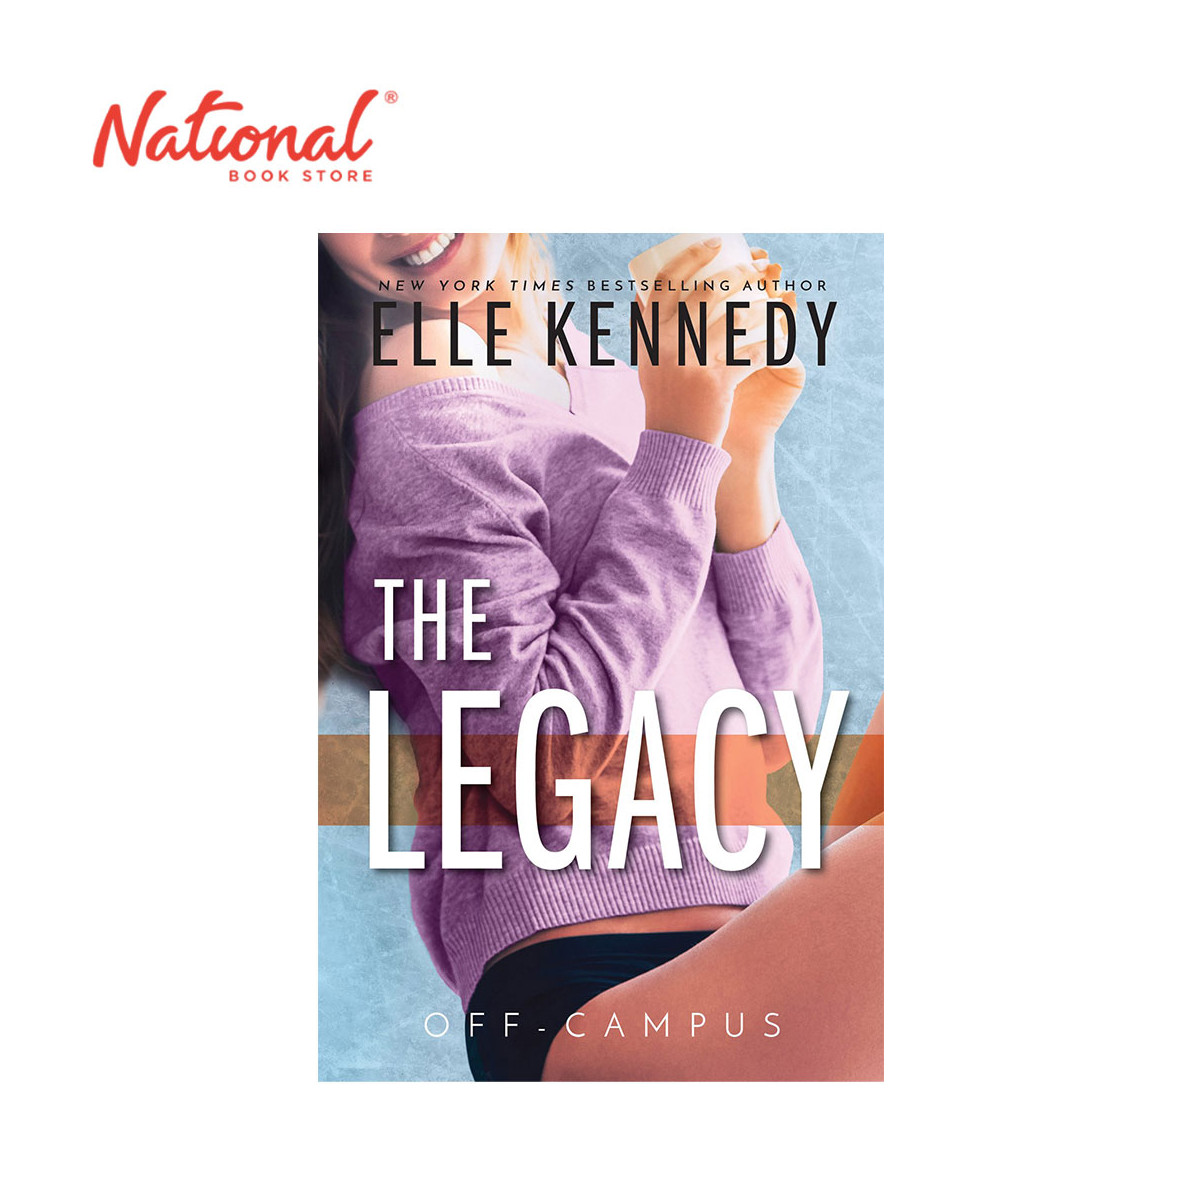 Off-Campus 5: The Legacy by Elle Kennedy - Trade Paperback - Romance Fiction